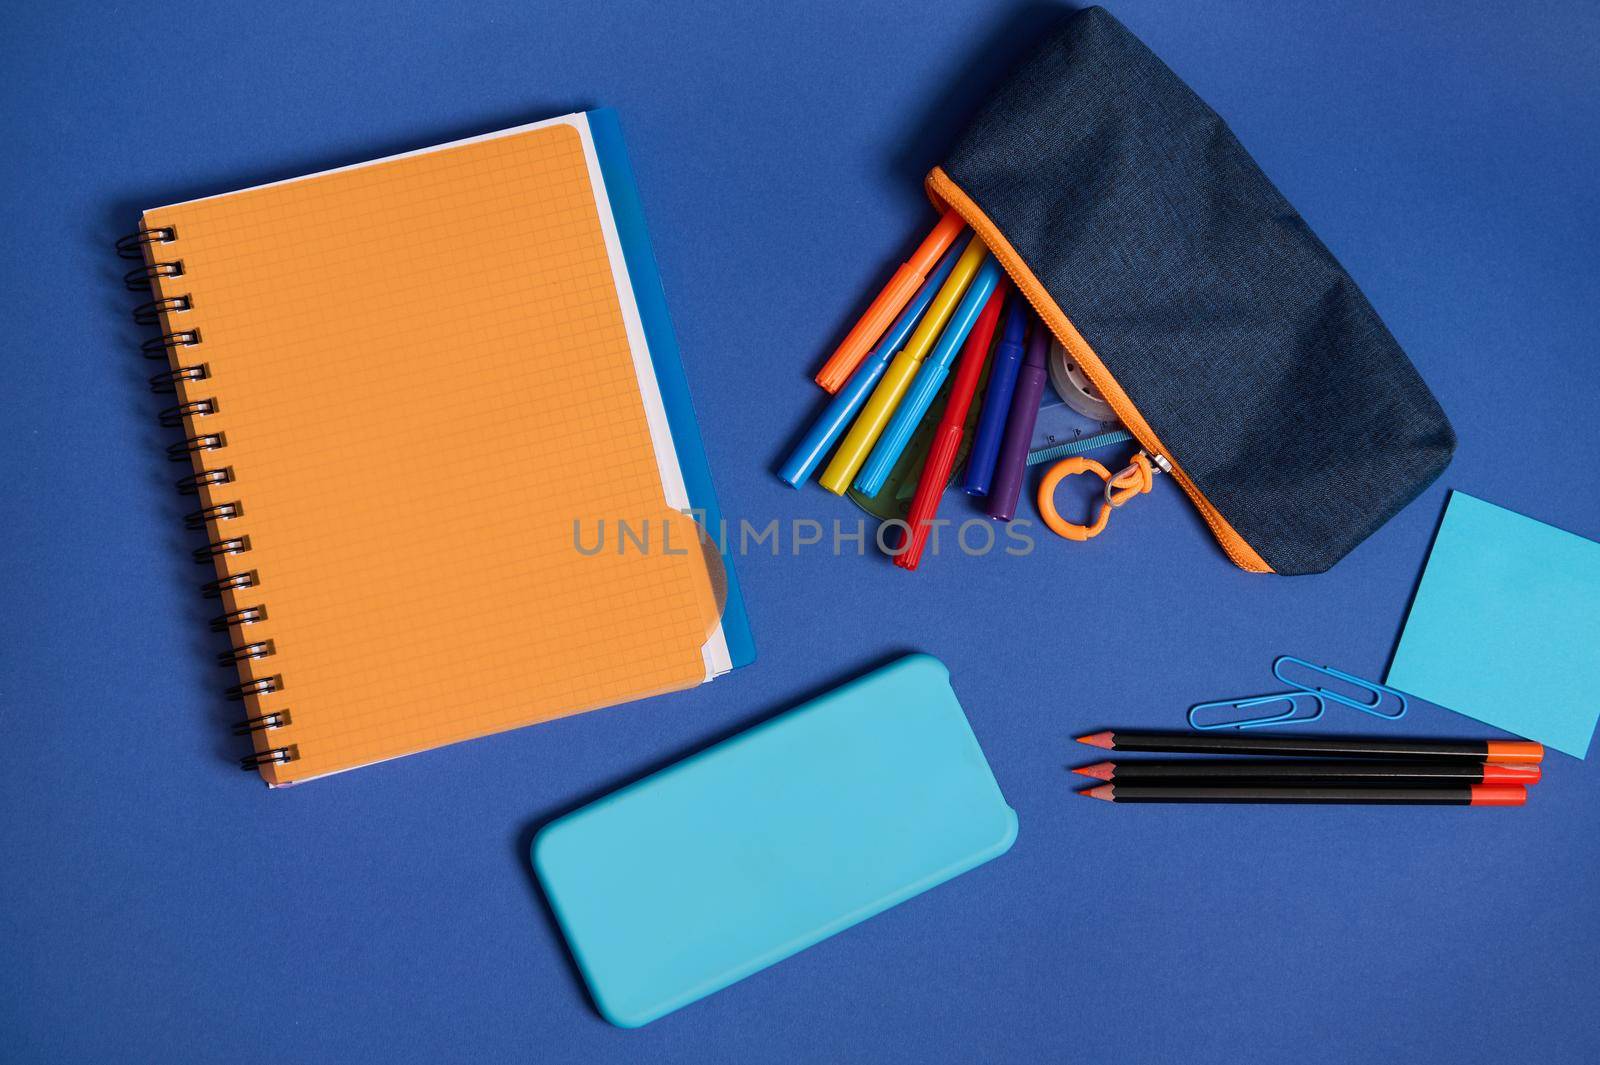 Top view of school office supplies and a smartphone lying screen down on a blue background . Flat lay composition of stationery in two contrasting colors, blue and orange with copy space